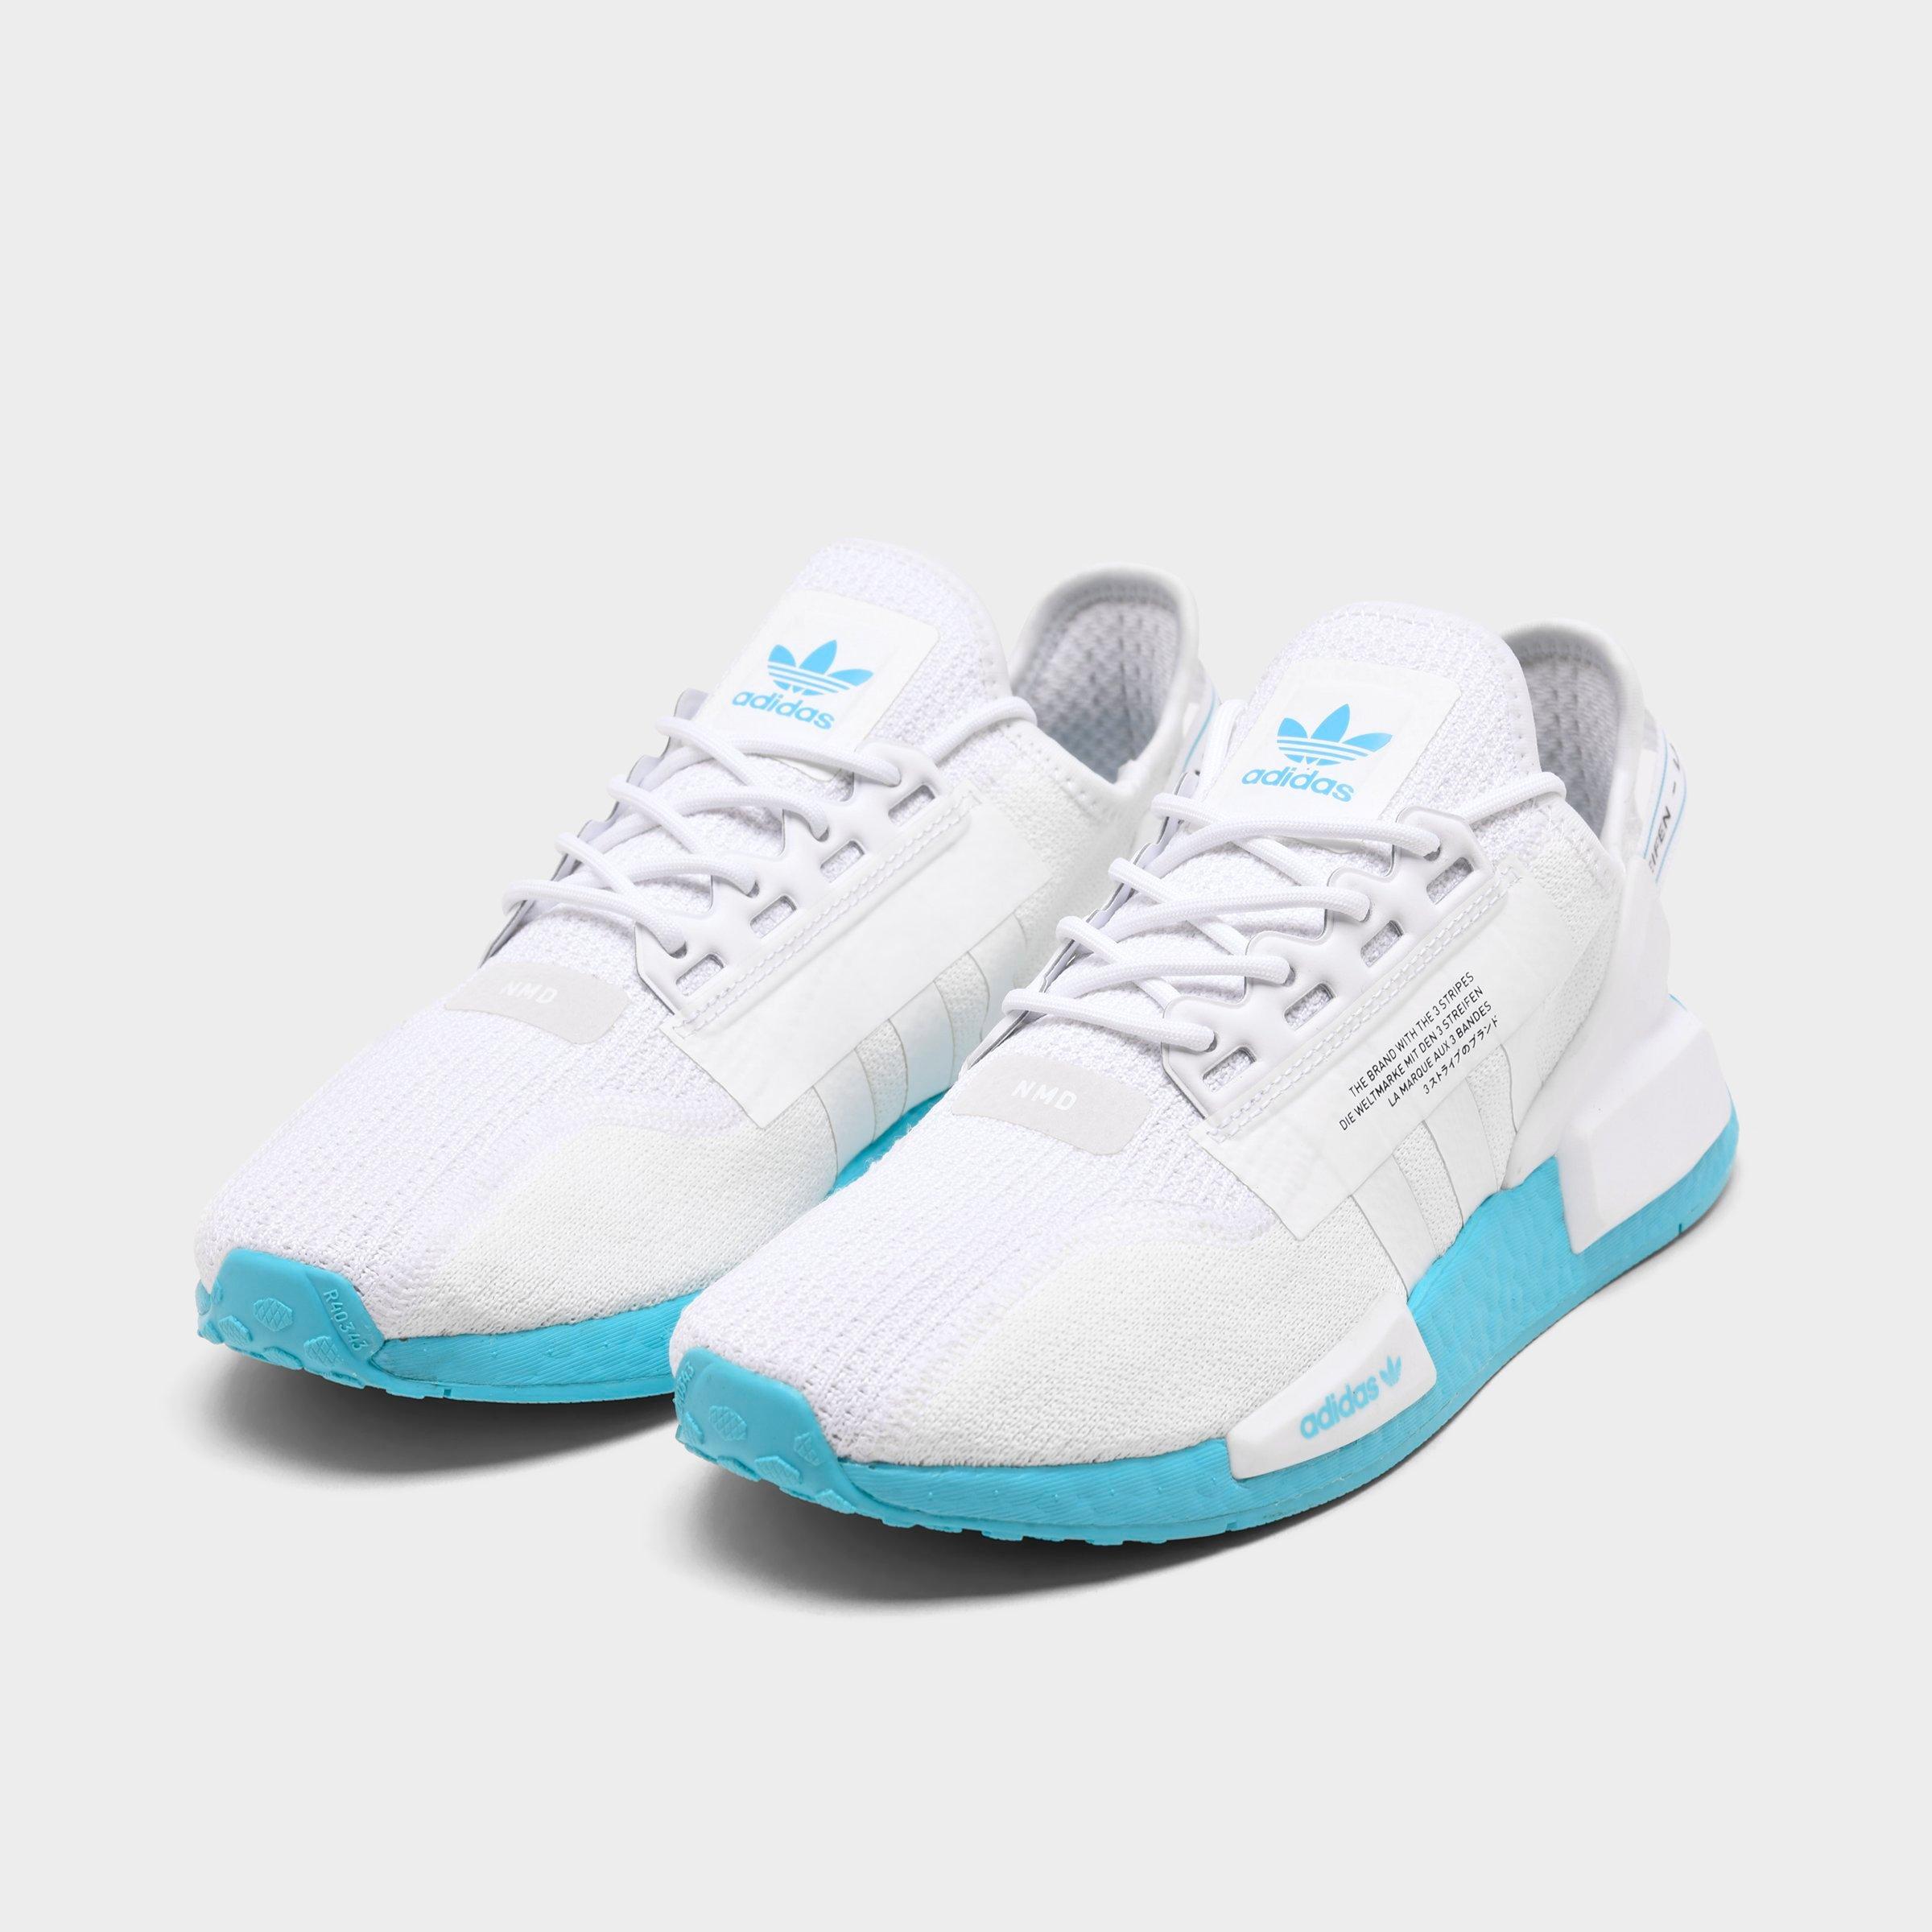 Adidas NMD Womens Shoes R1 Group Purchase and PTT Recommendation 2020 Monthly Febbi Price